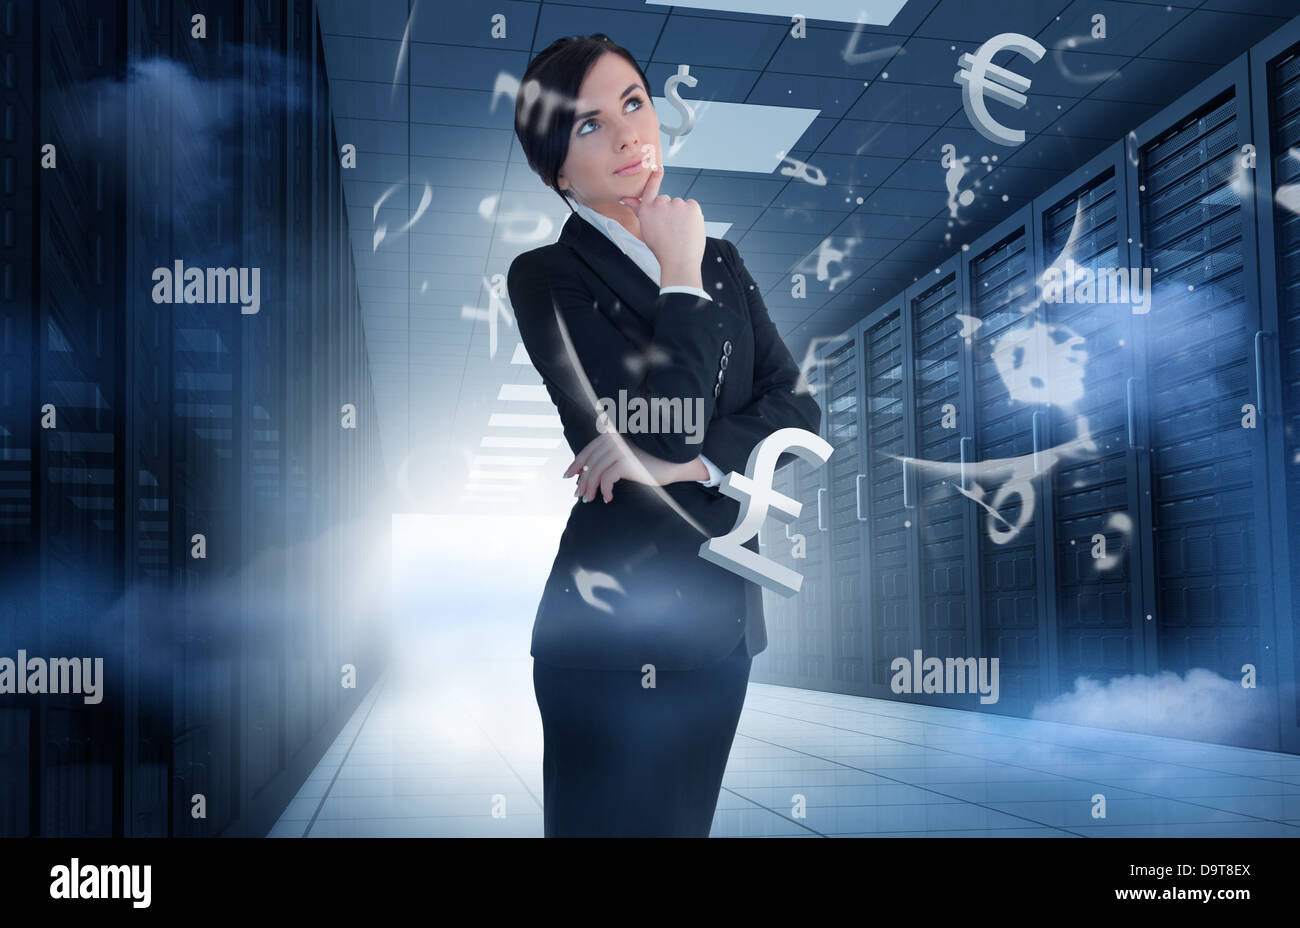 Businesswoman standing in data center with currency graphics Stock Photo